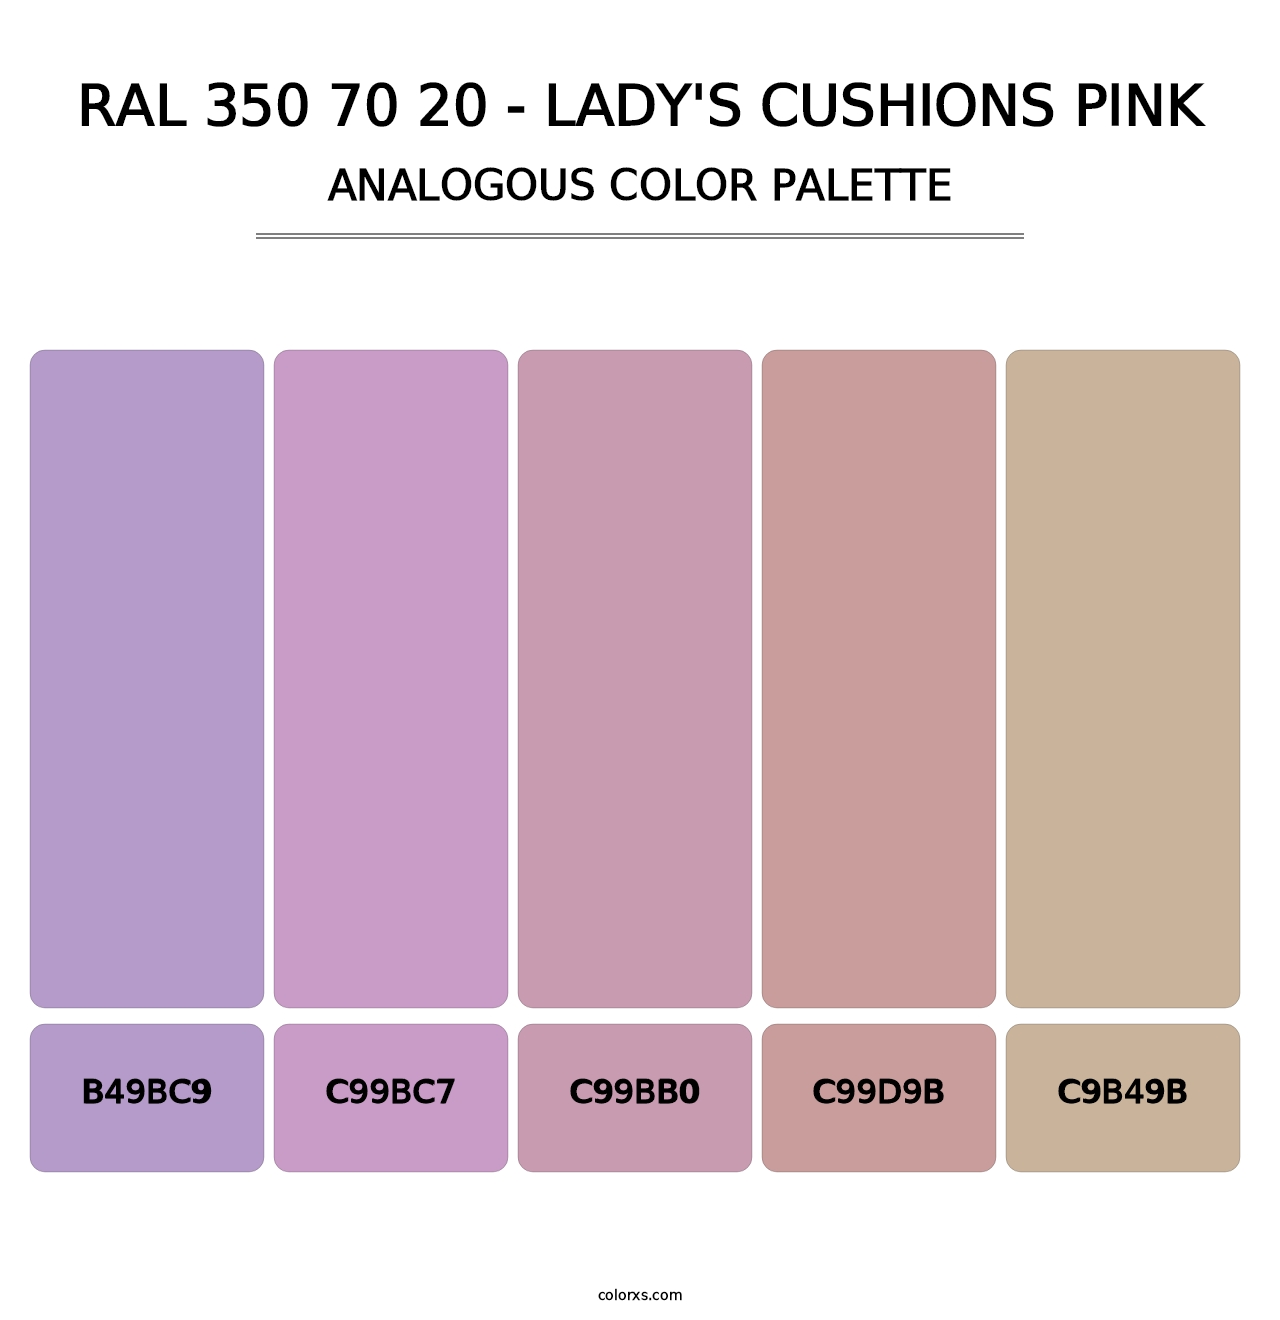 RAL 350 70 20 - Lady's Cushions Pink - Analogous Color Palette